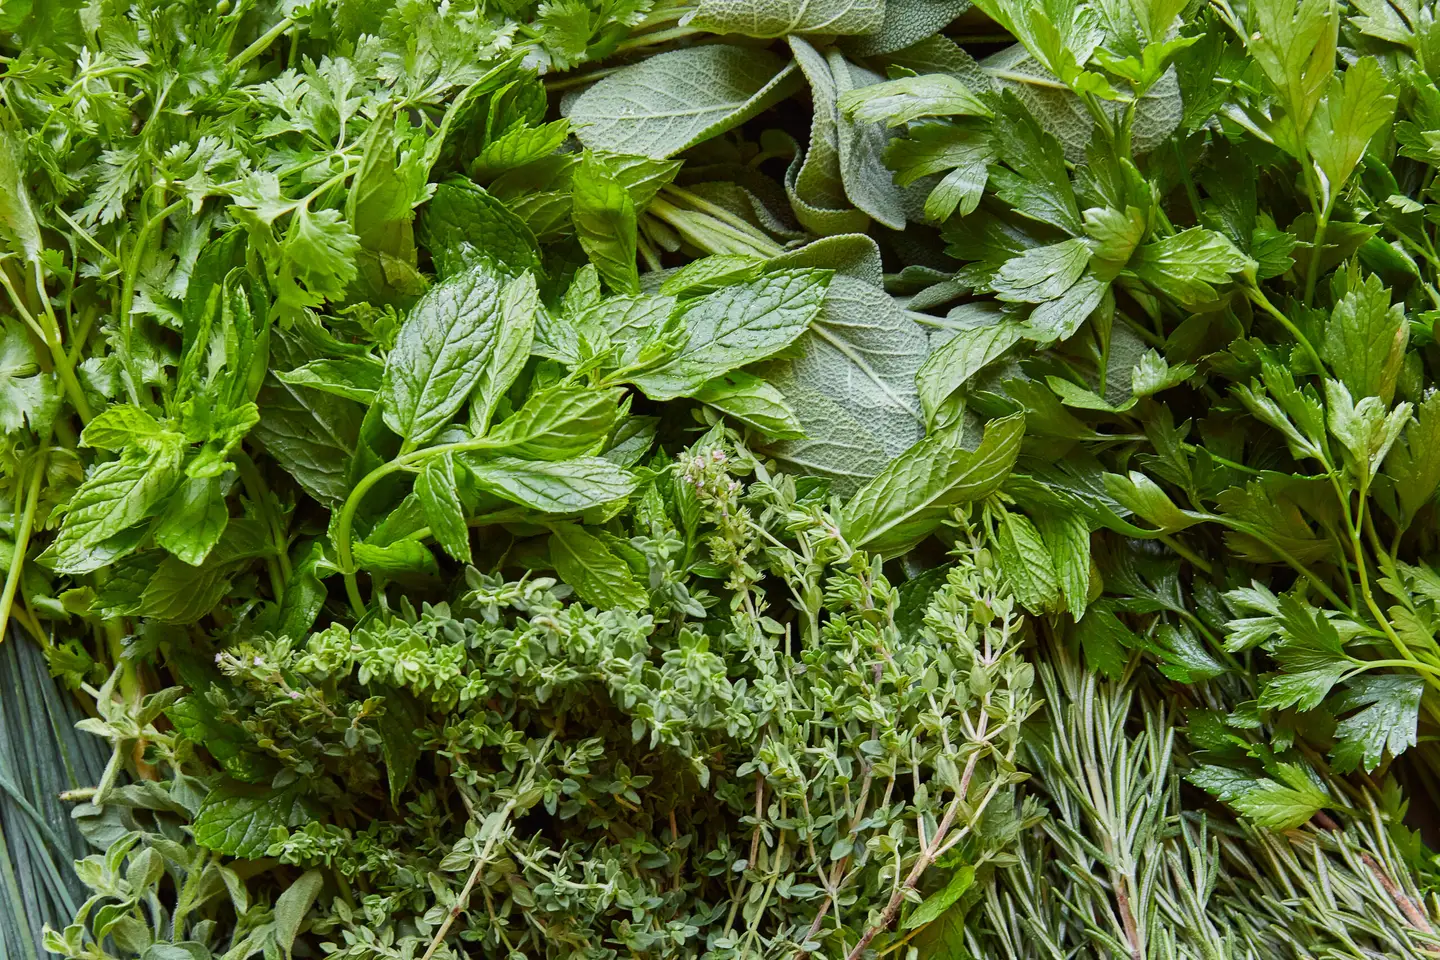 HANDS-ON MICRO HERB MASTERCLASS